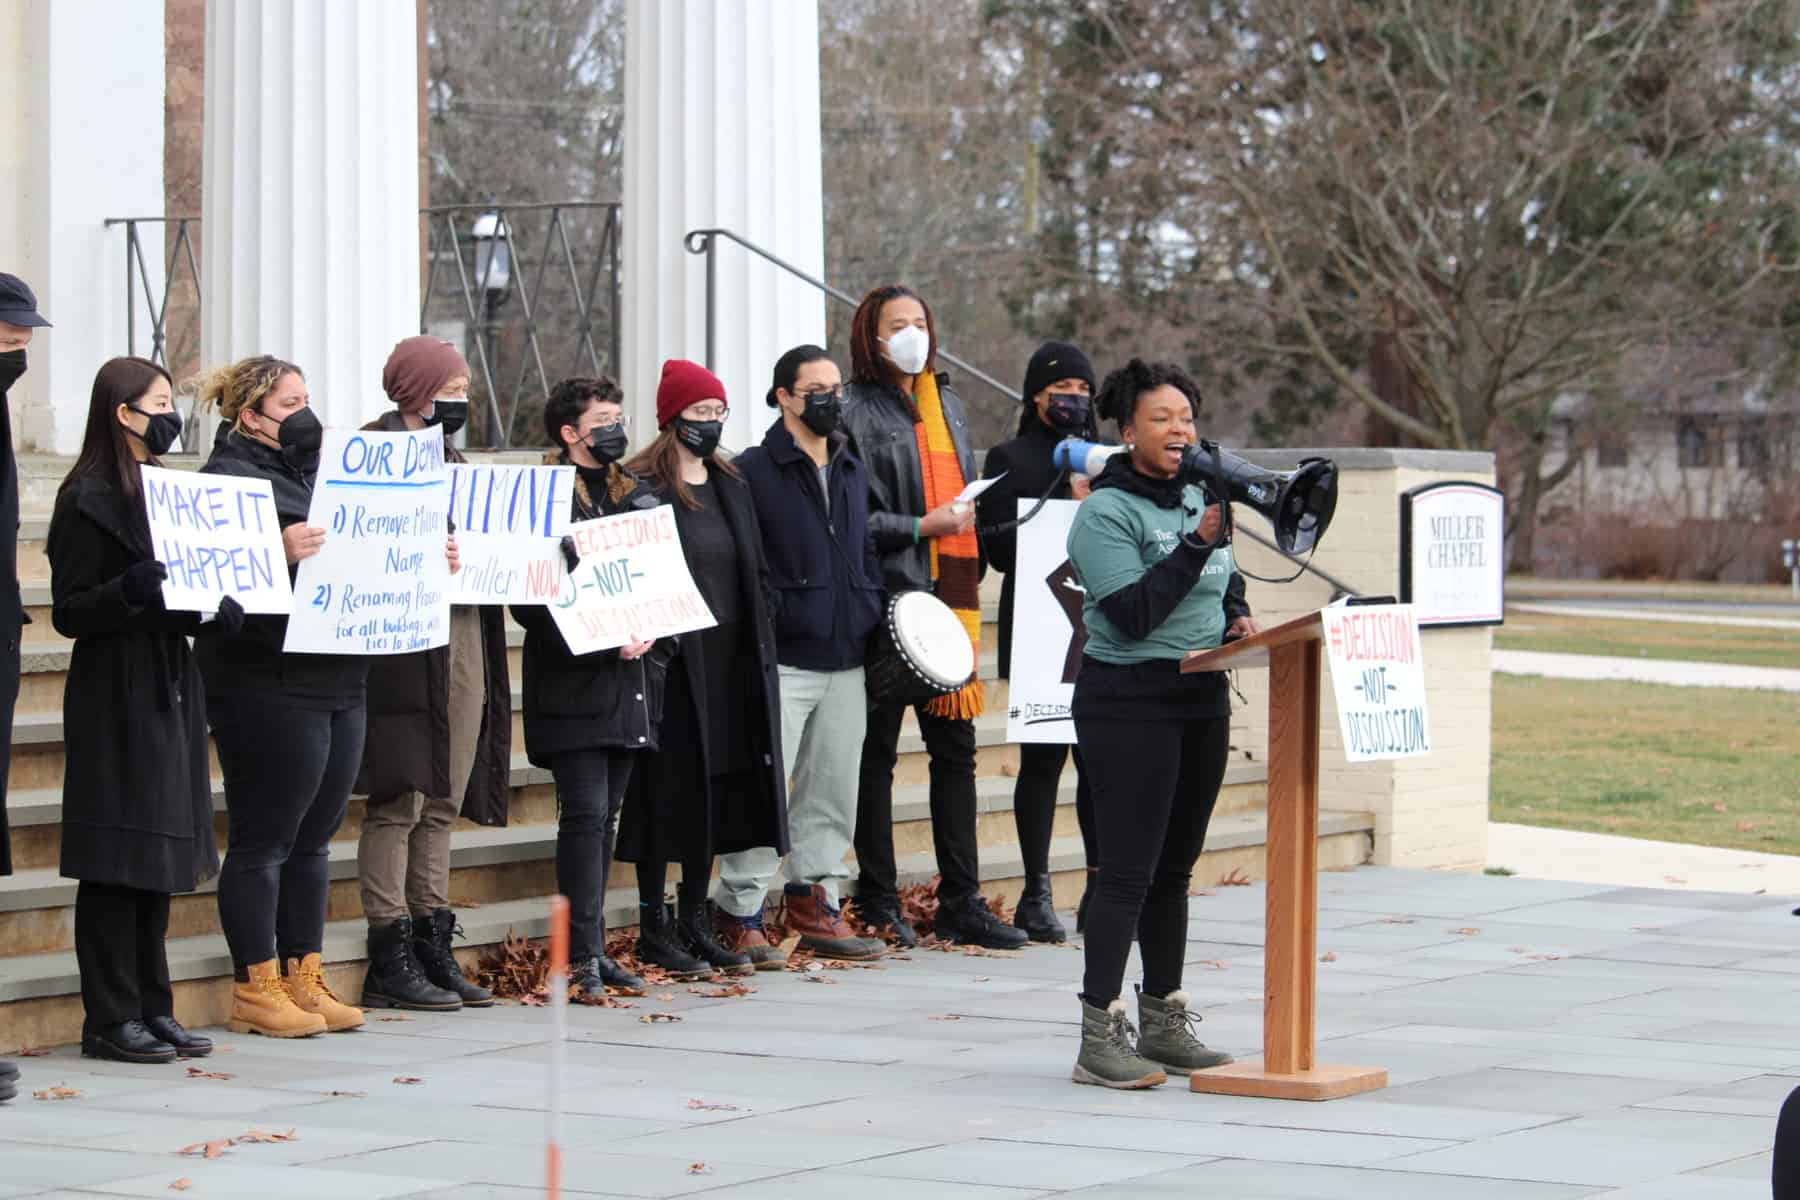 Photos: Princeton Seminary students call on trustees to change name of chapel